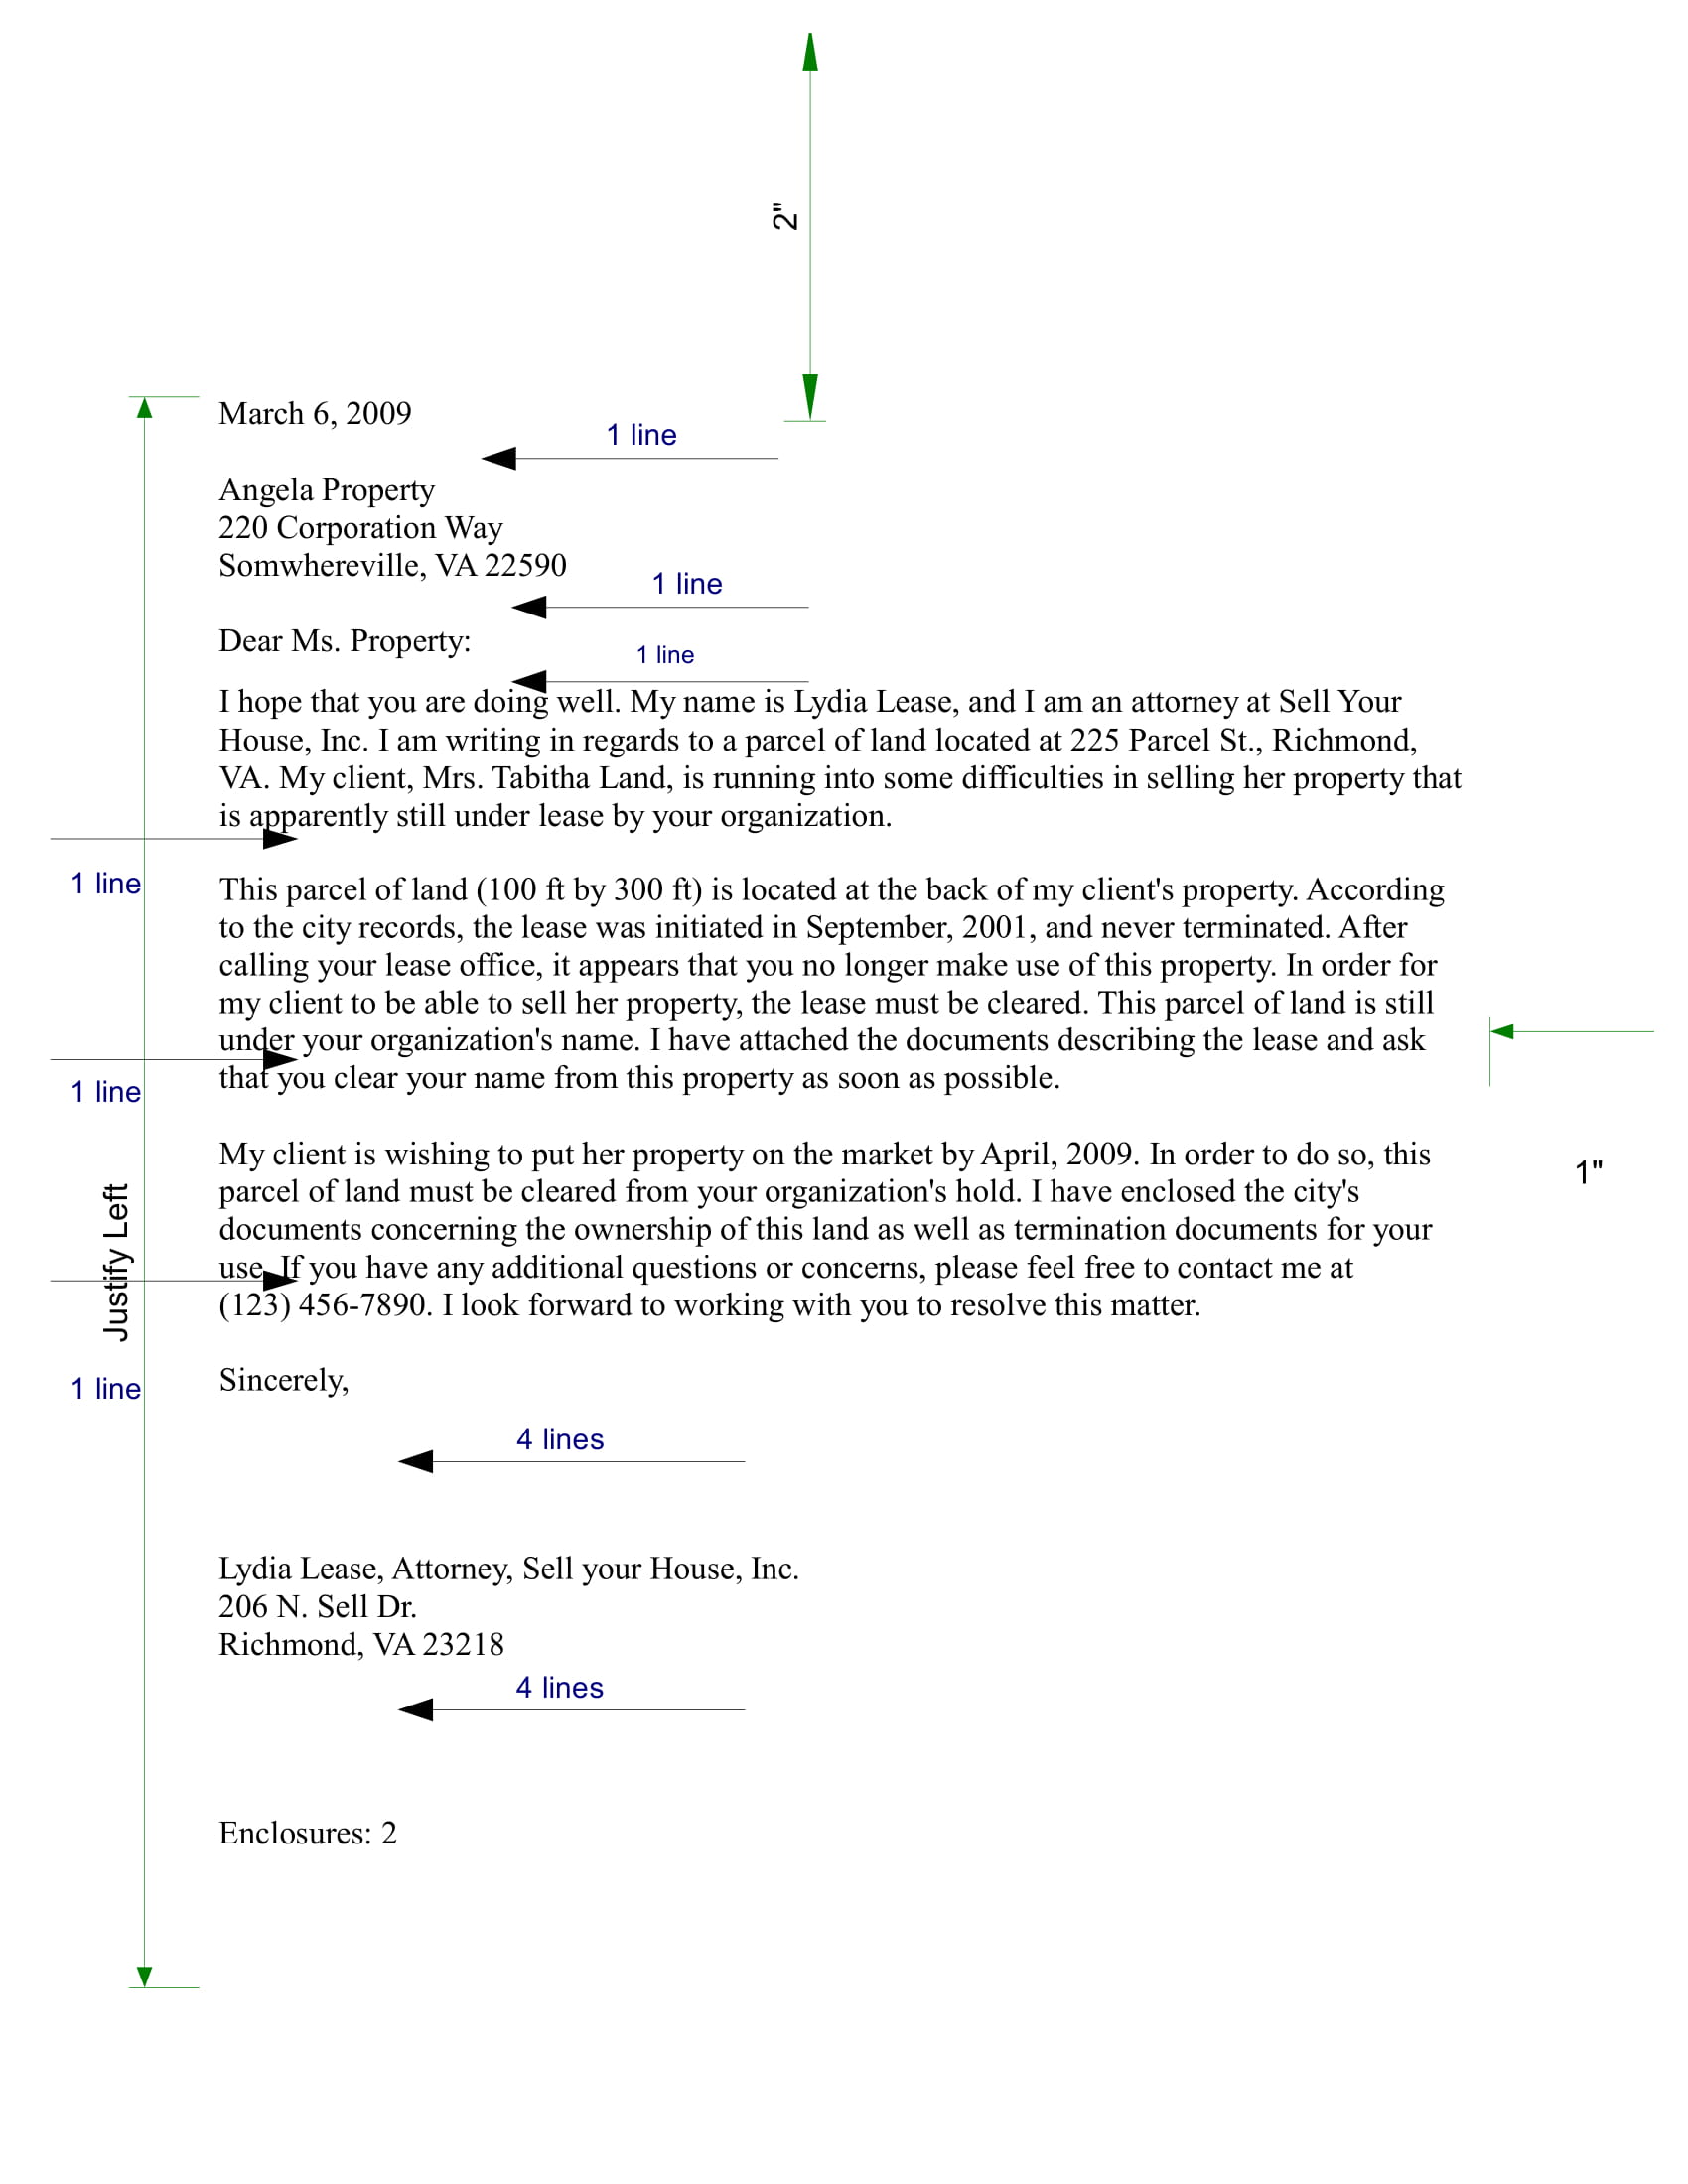 8+ Business Formal Letter Examples - PDF | Examples